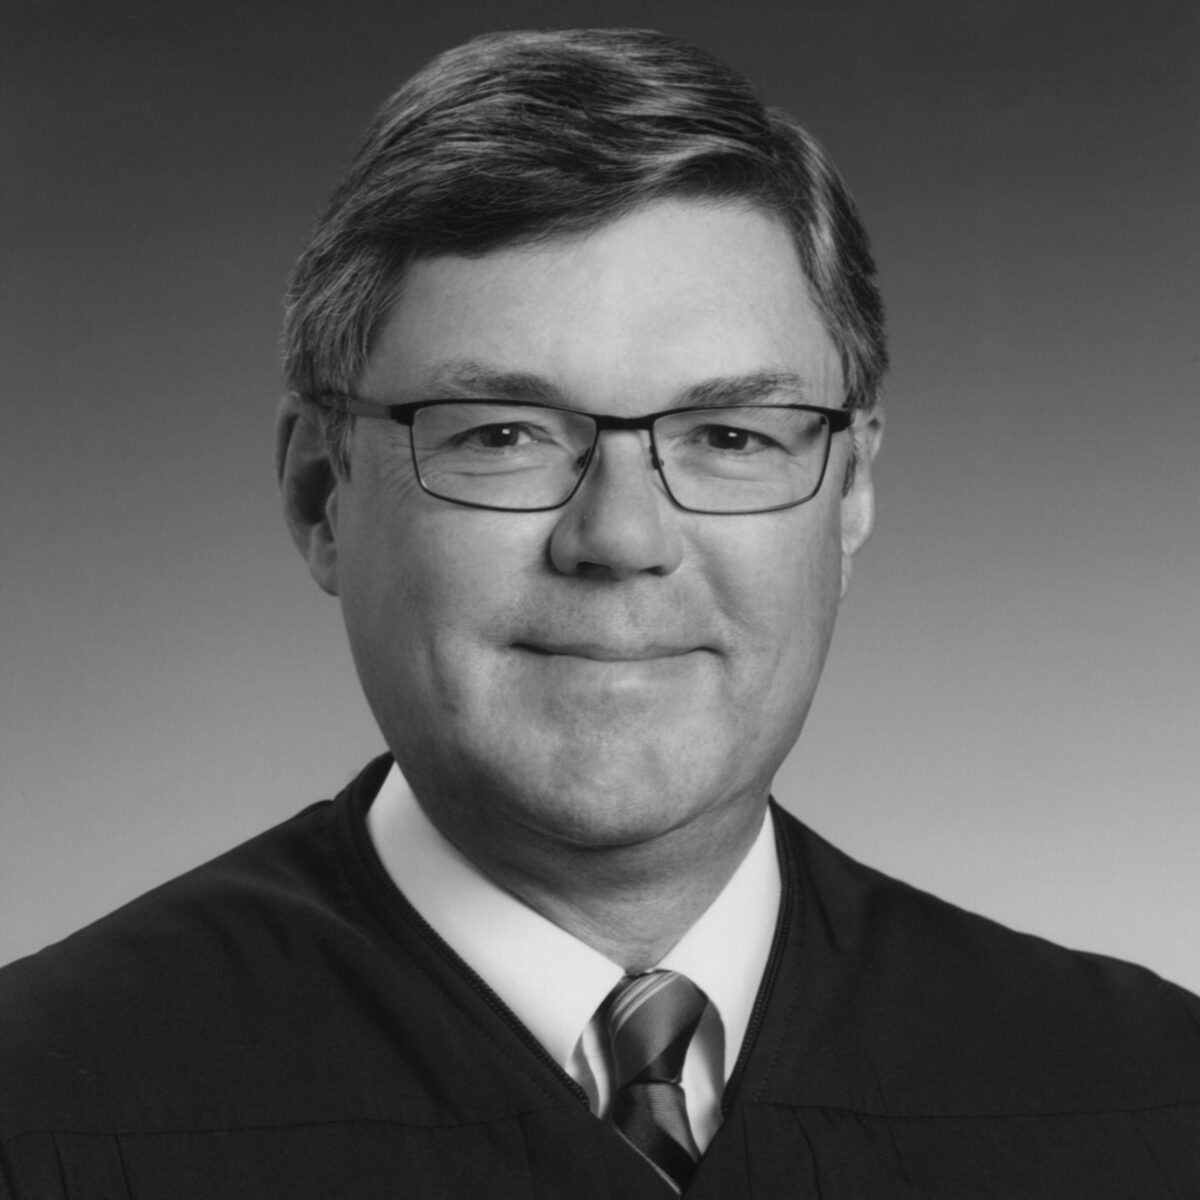 Black-and-white photo of man in glasses wearing shirt and tie and judicial robe.